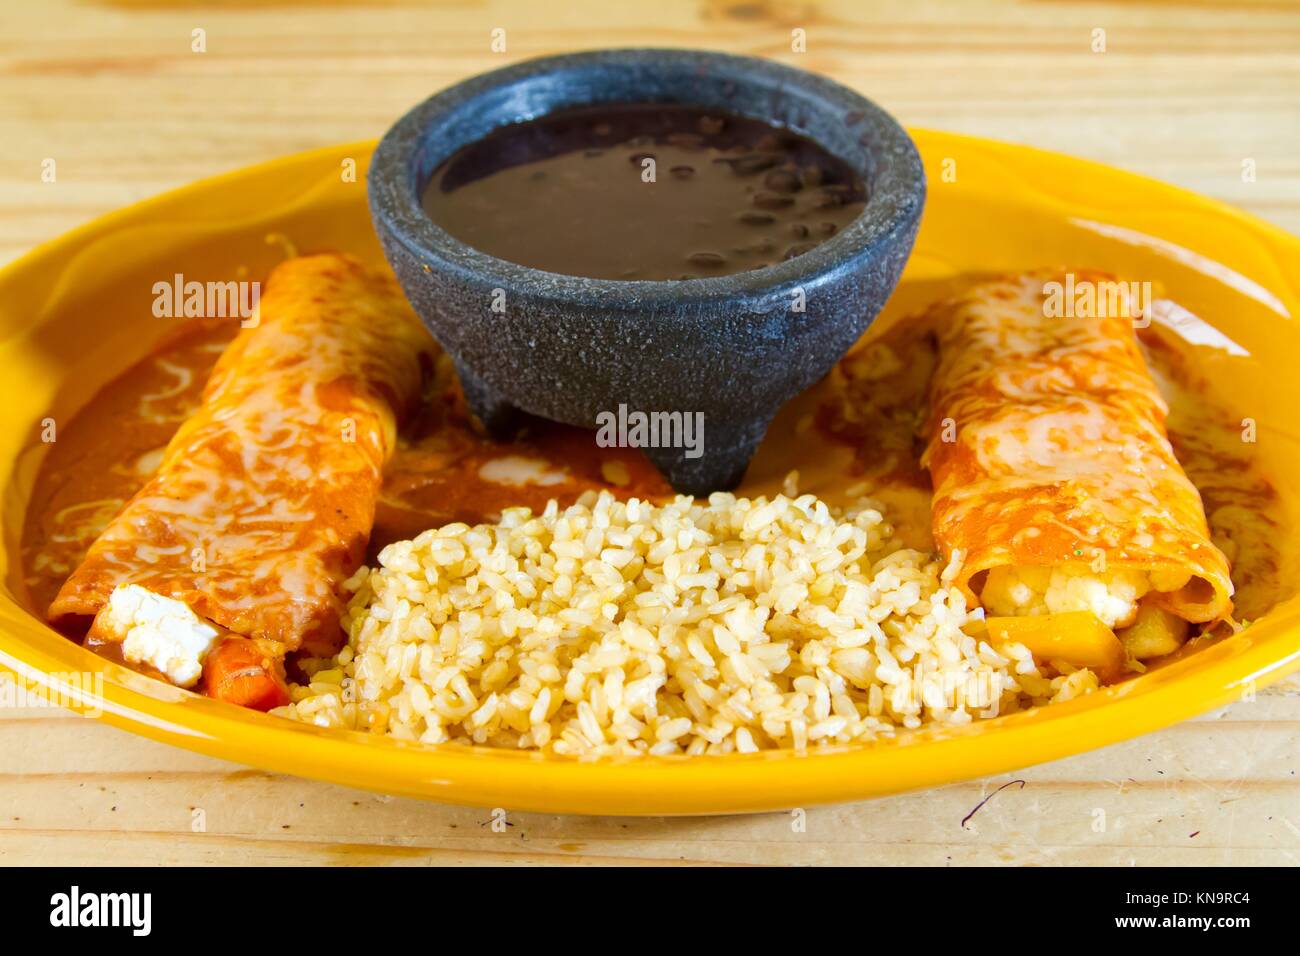 Enchiladas and rice and beans at a Mexican restaurant serving authentic cuisine. Stock Photo